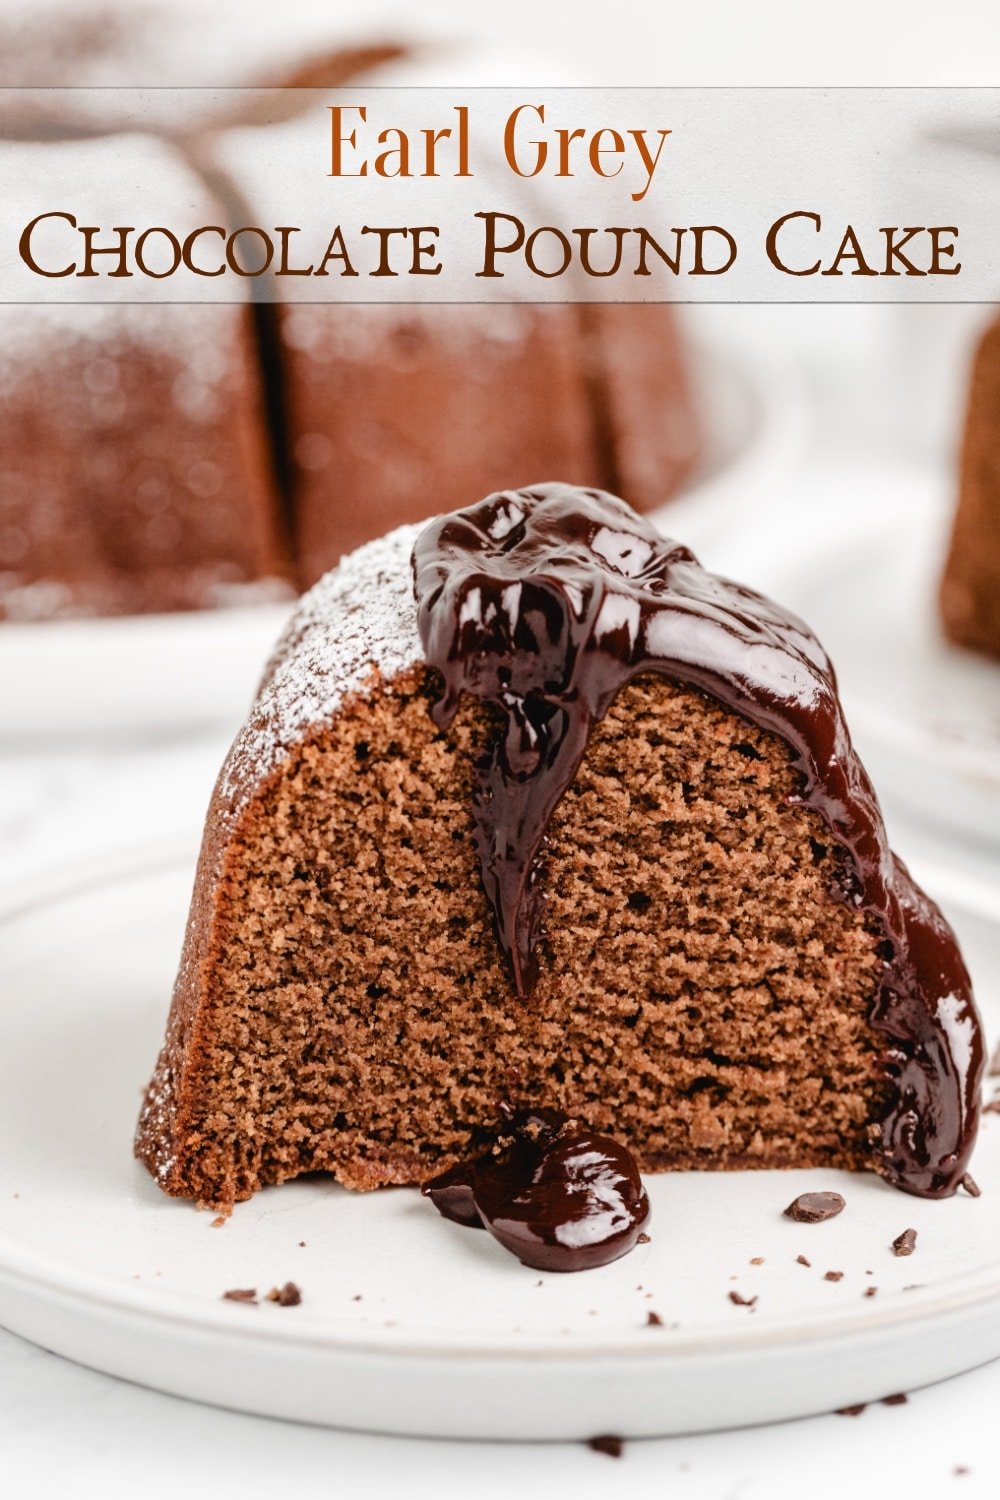 Chocolate pound cake undergoes a delicious transformation with the addition of Earl Grey tea in both the batter and dark chocolate drizzling sauce, infusing them both with the delicate nuances of bergamot. The intricate combination of flavors unfolds in every bite. via @cmpollak1